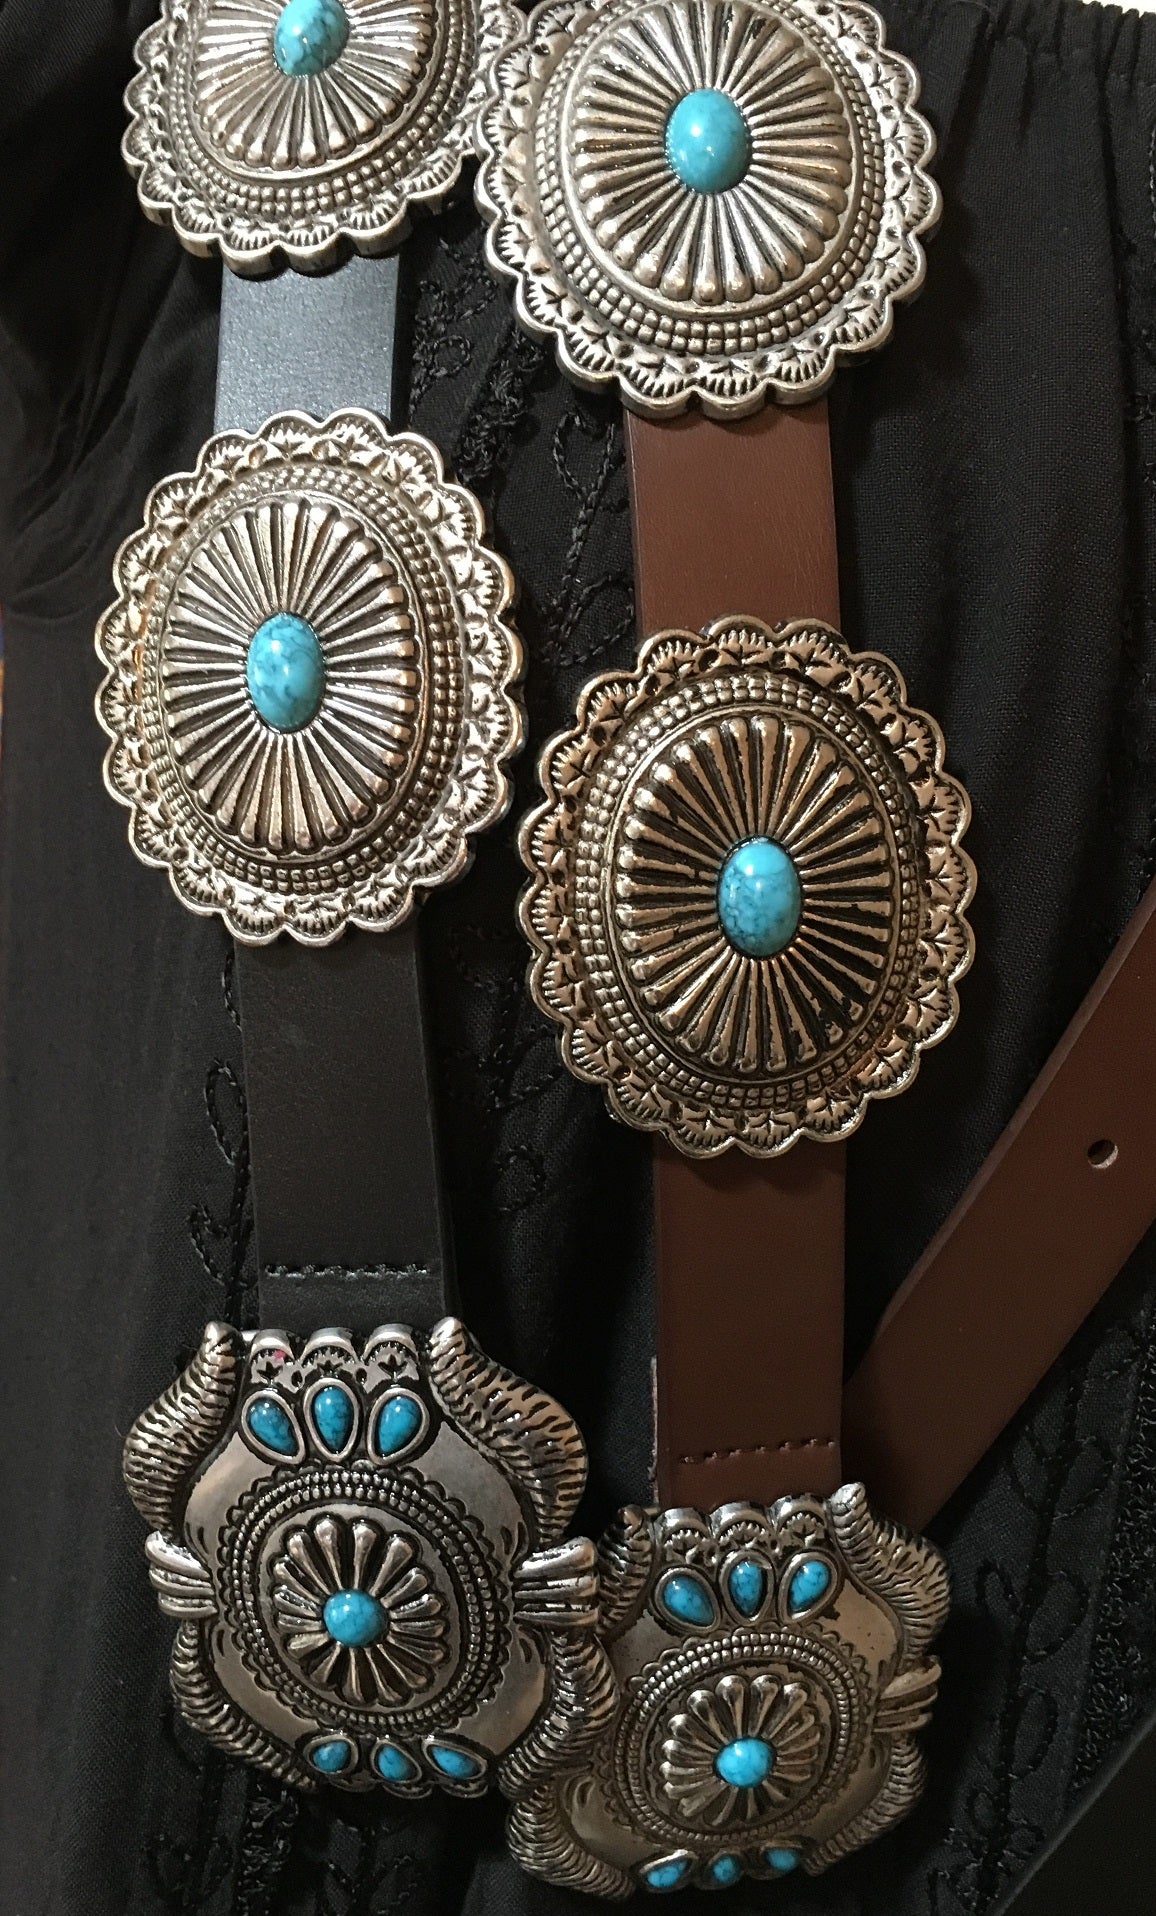 Western Fashion Leather Belts with Oval Conchos and Faux Turquoise